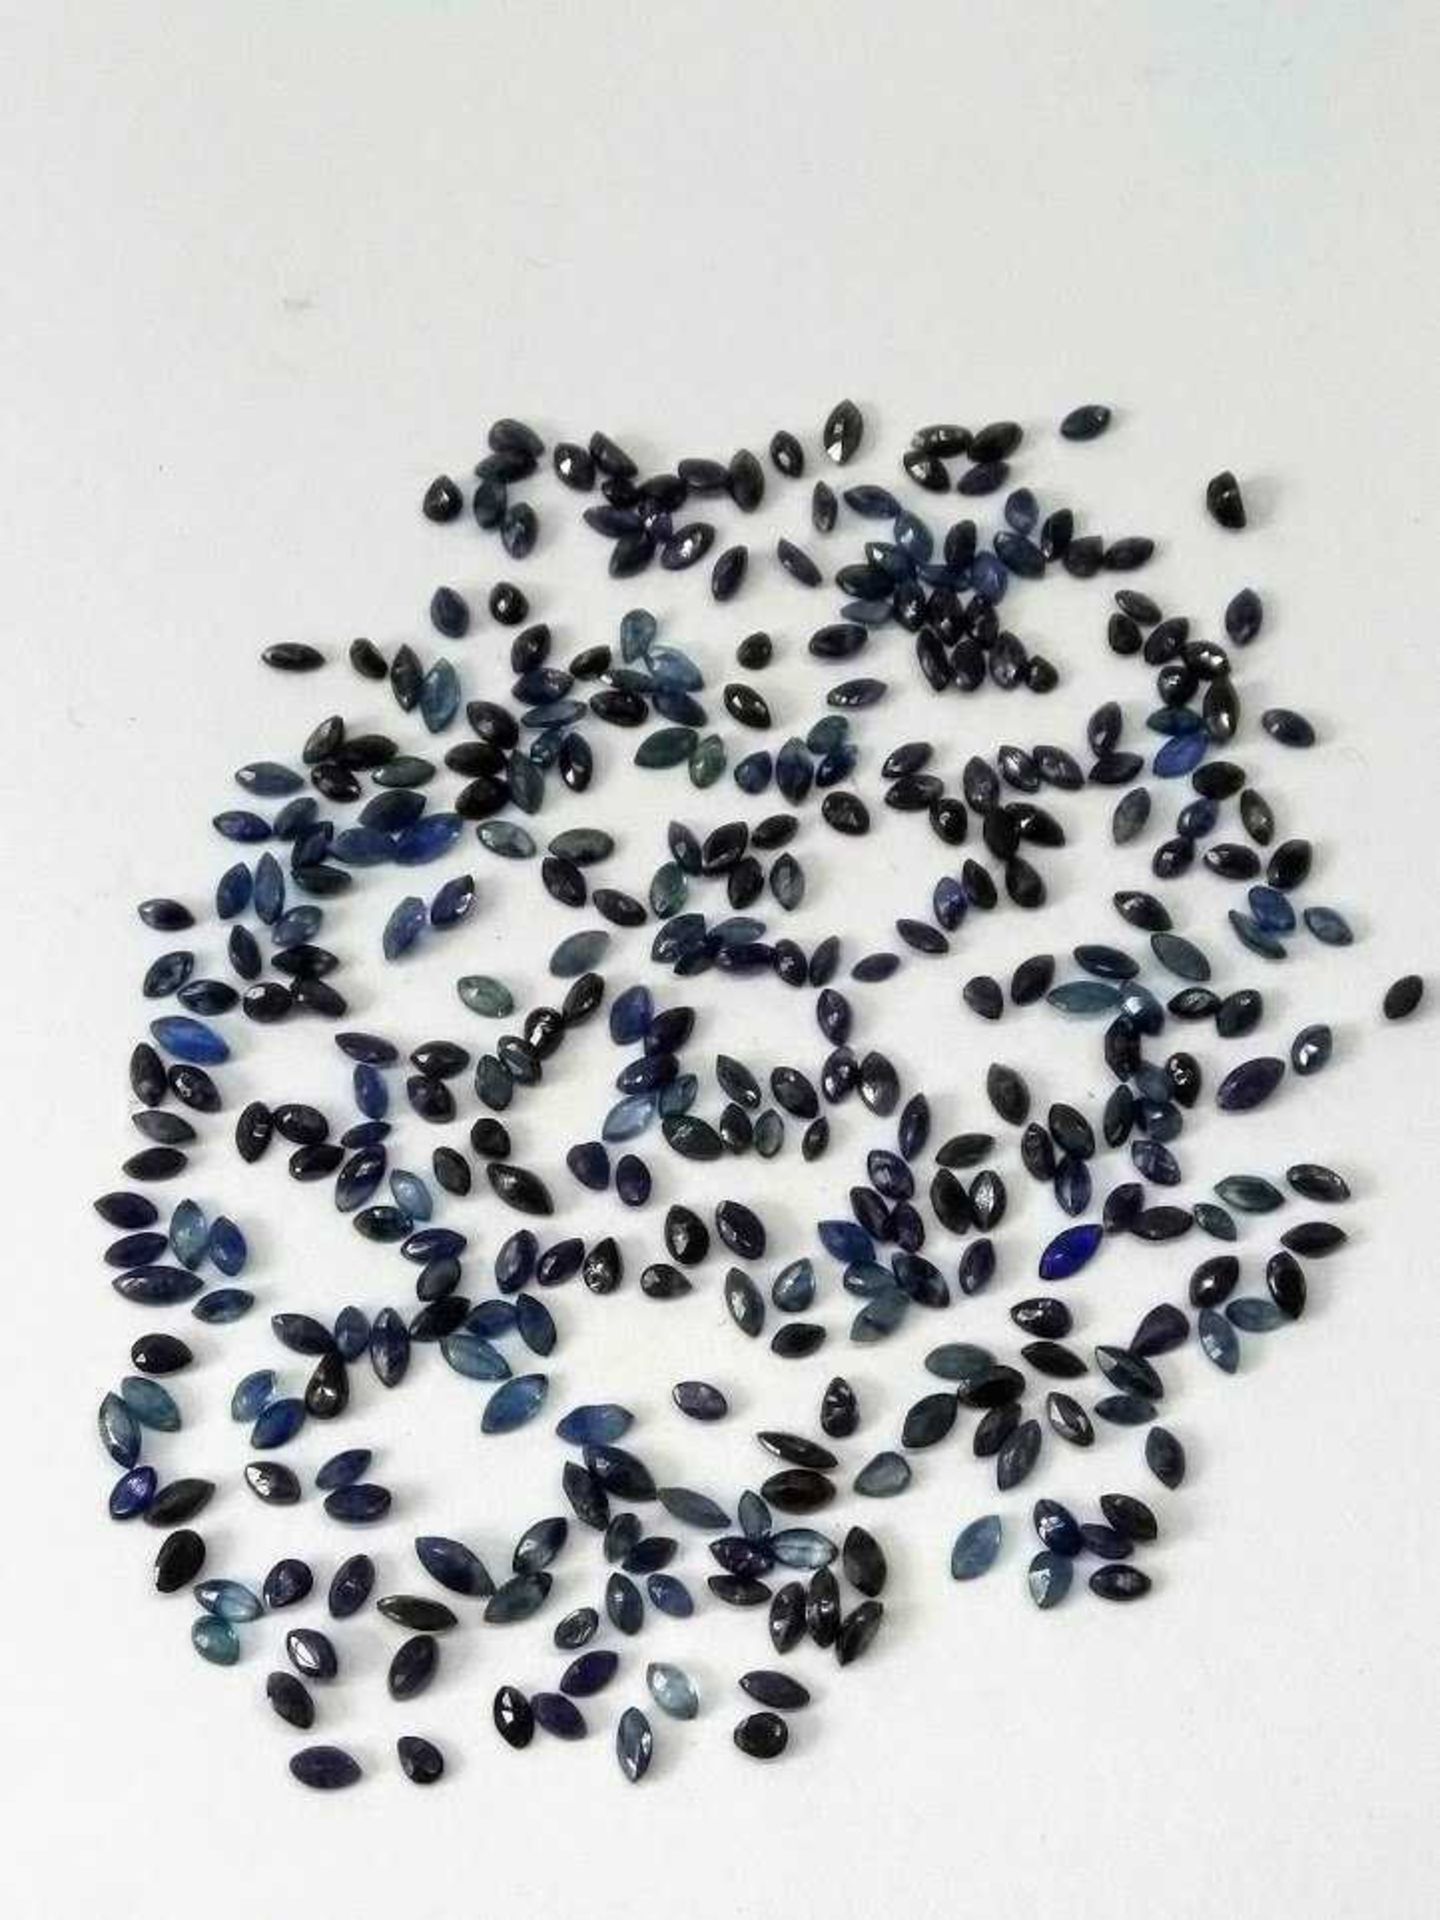 VERY HIGH VALUE - IGL&I Certified 30.00 Cts 273 Pieces Natural Untreated Sapphire Gemstones, - Image 2 of 3